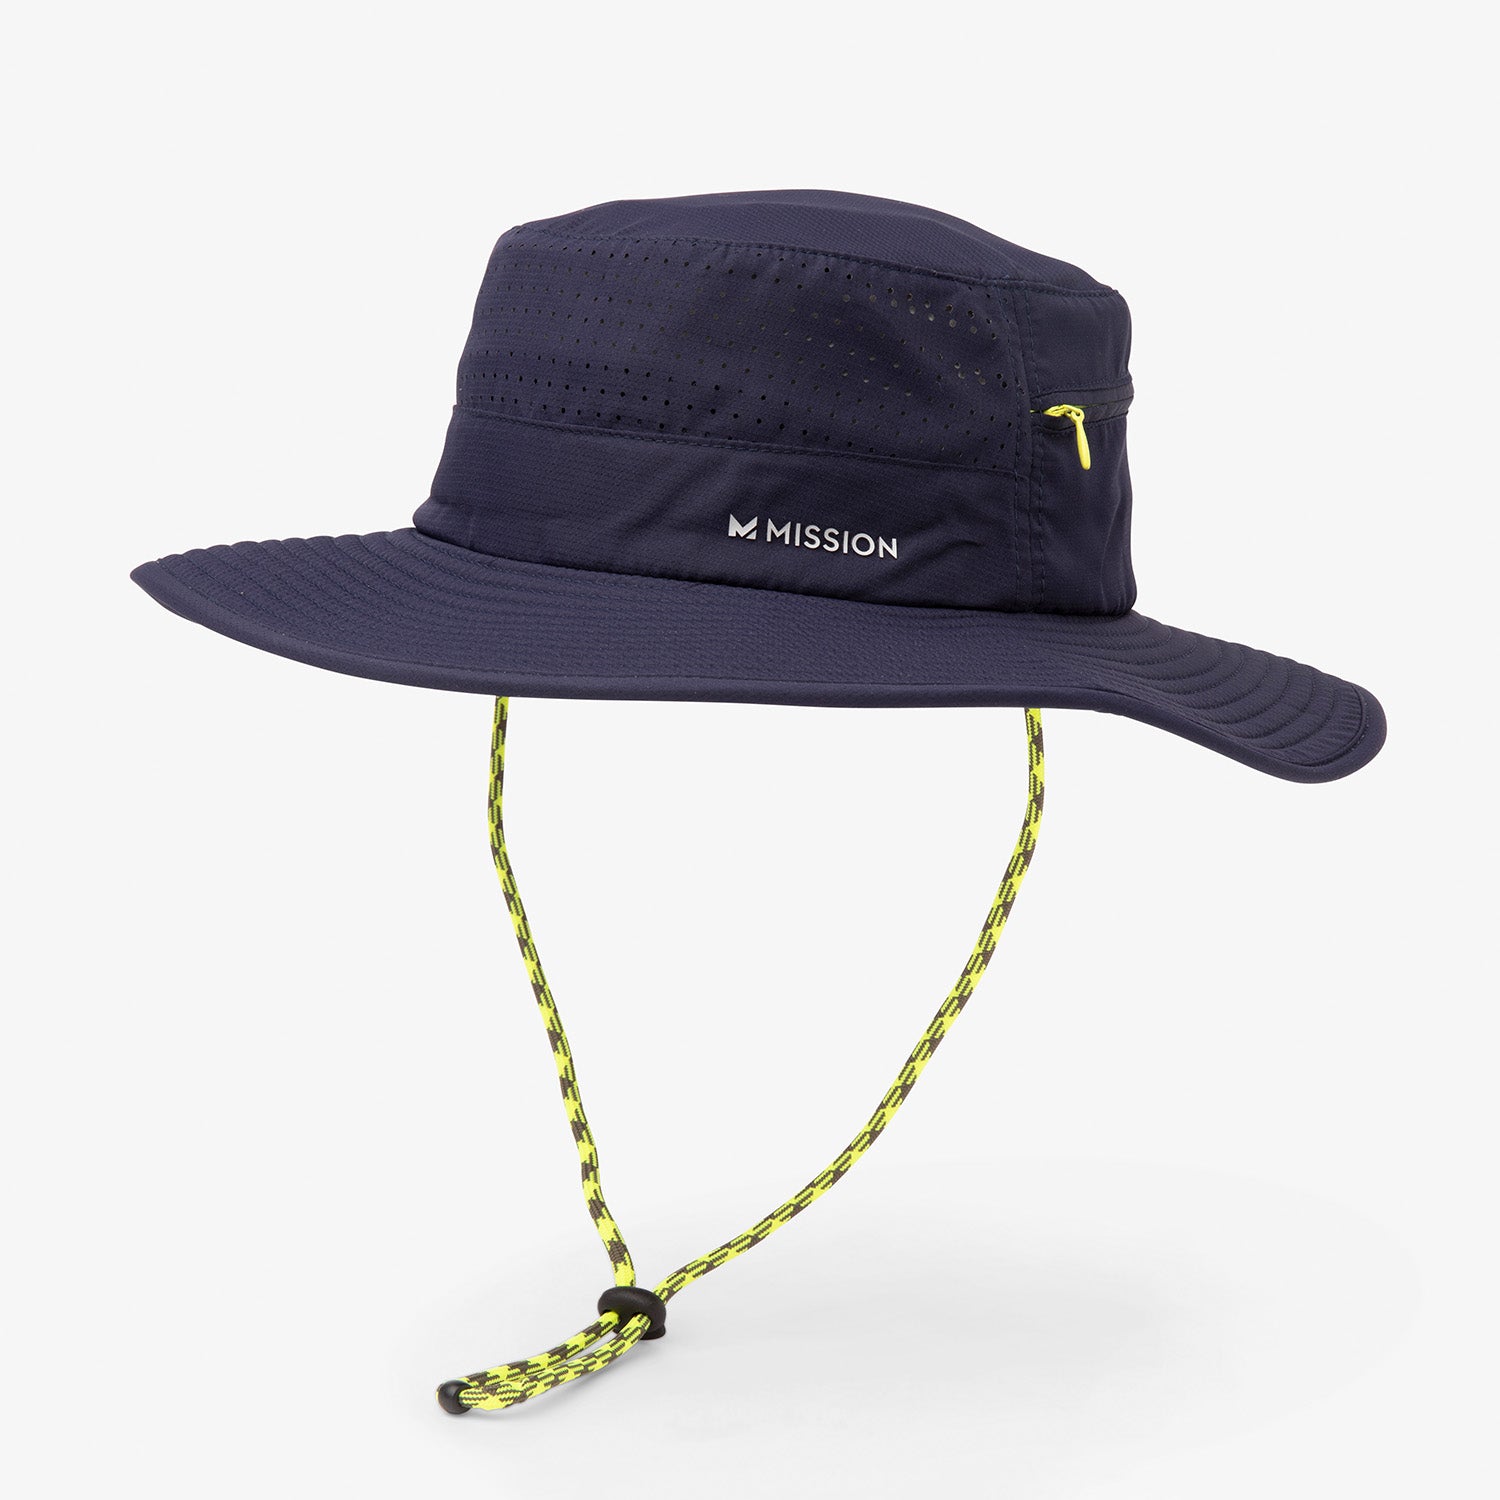  MISSION Cooling Anywhere Wide Brim Bucket Hat